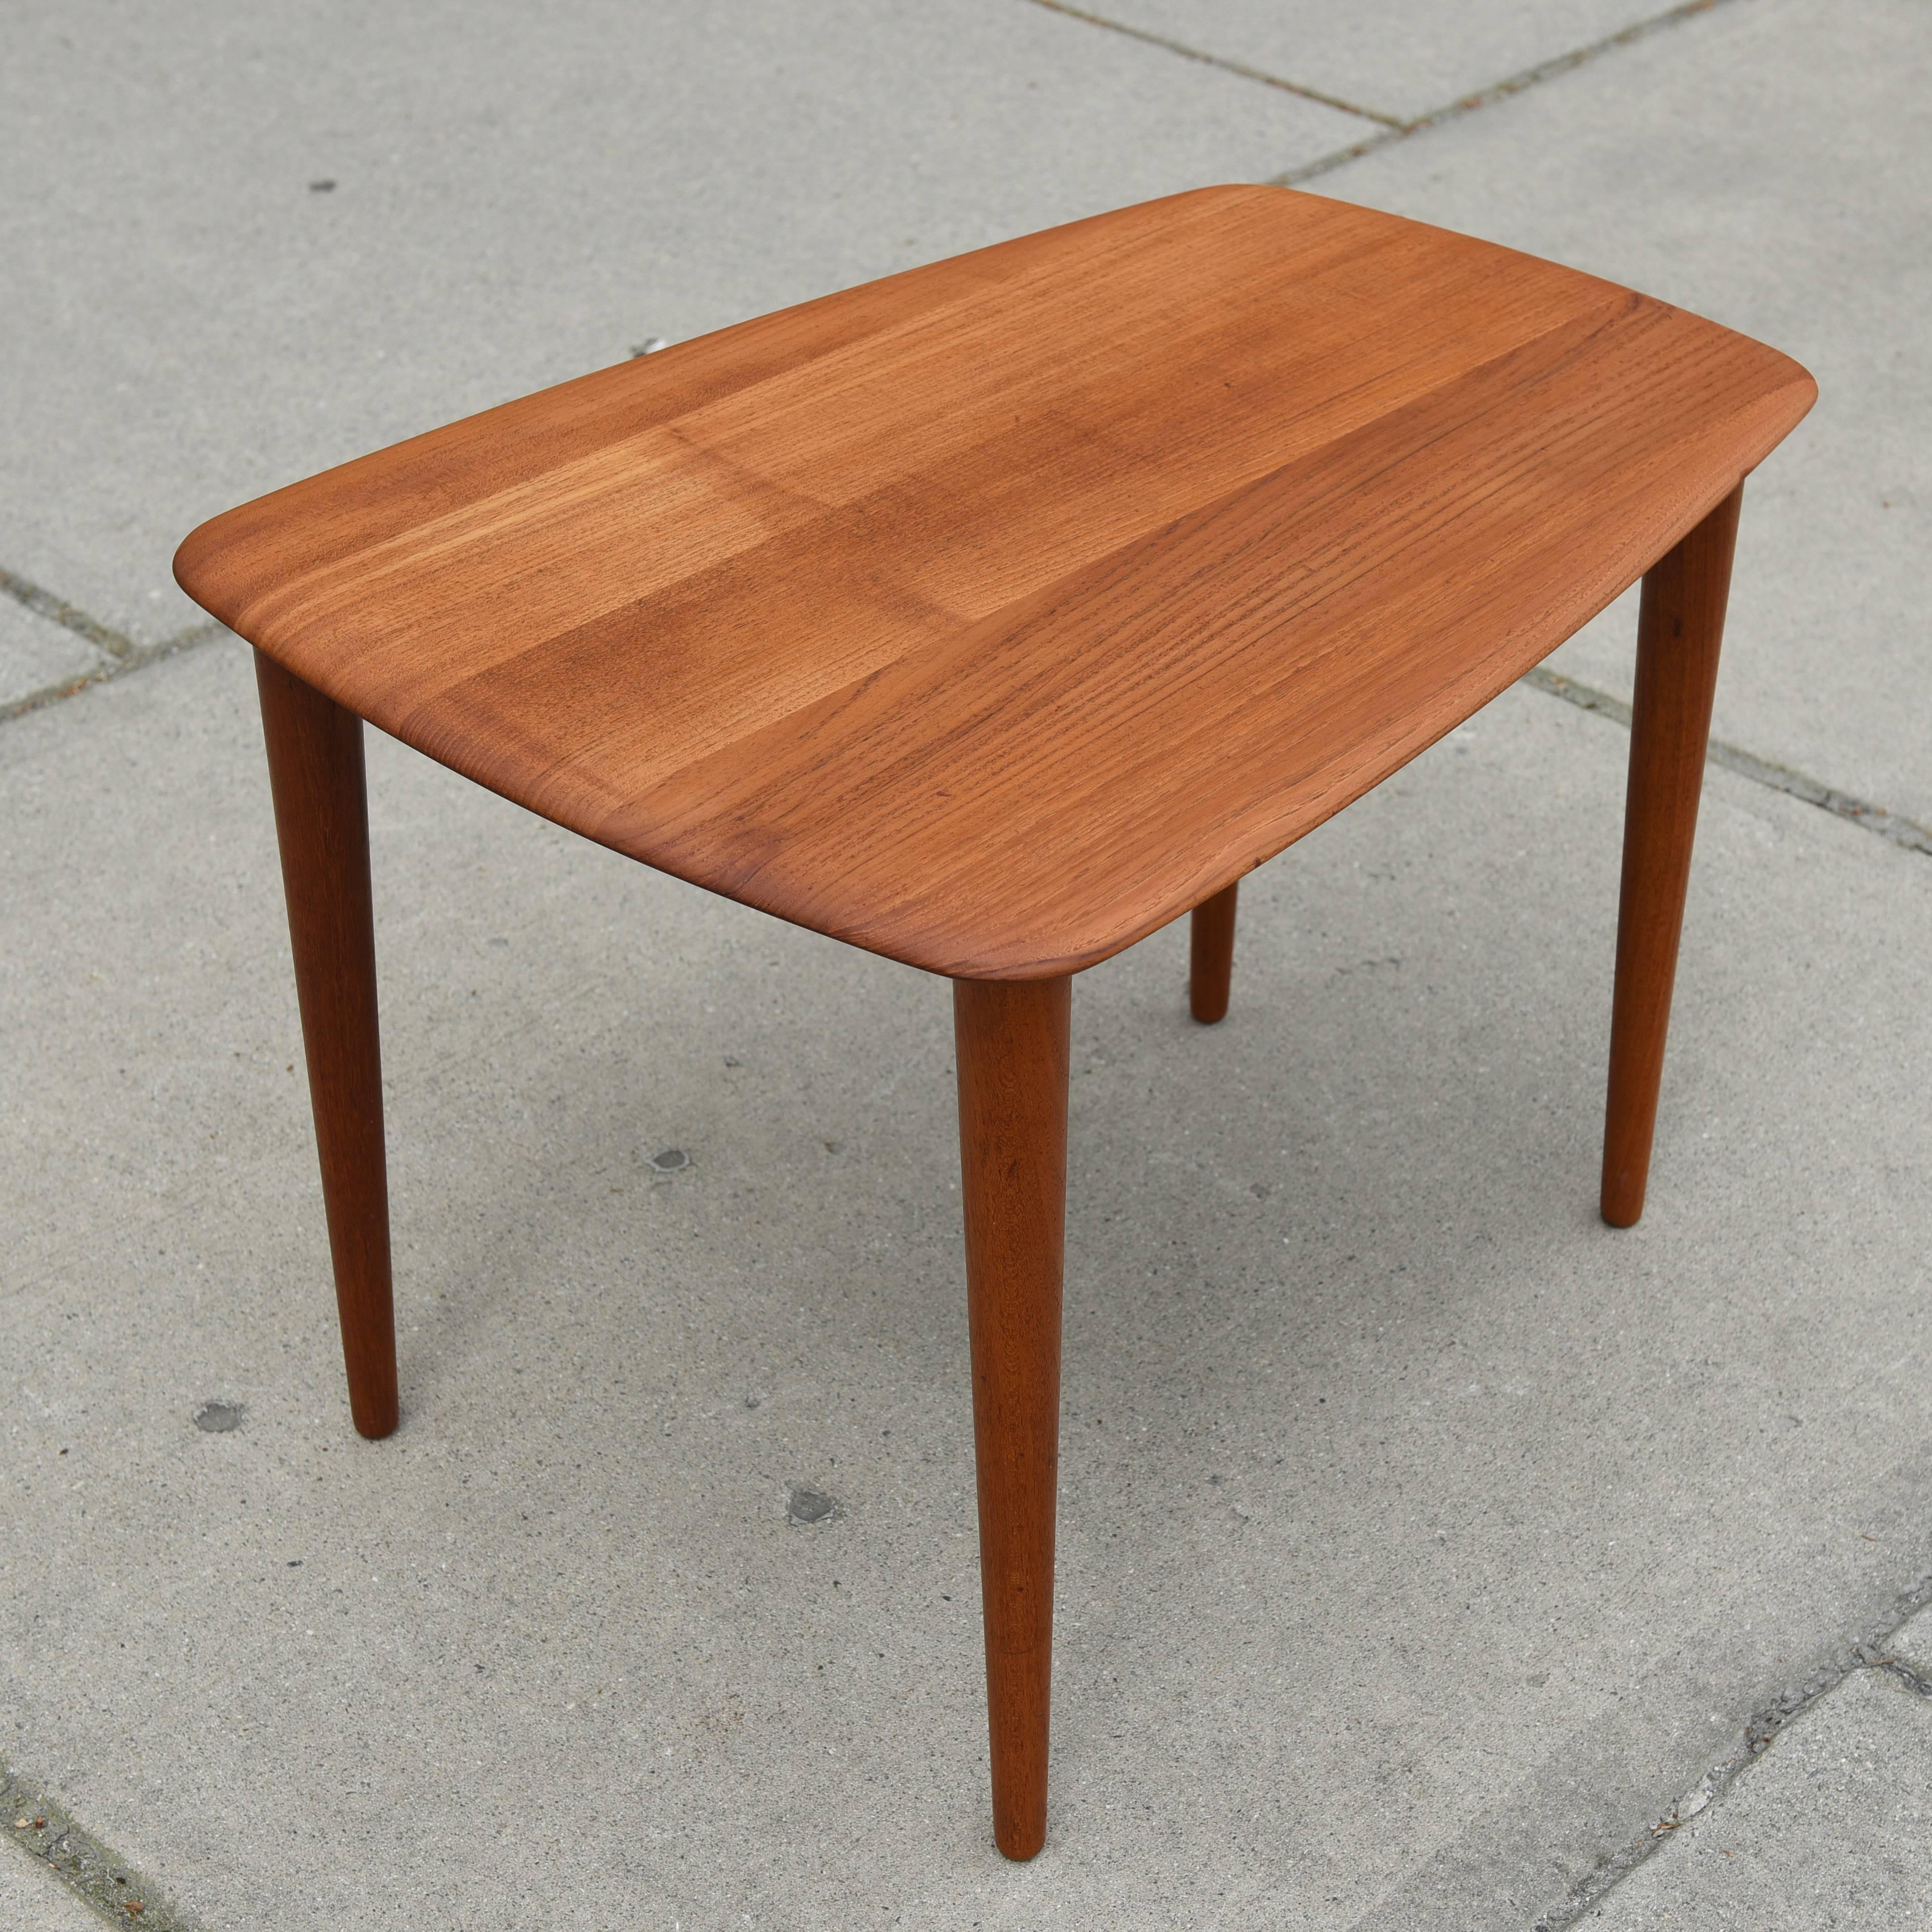 Solid teak side tables by Peter Hvidt for France & Sons. Refinished and restored condition.
 